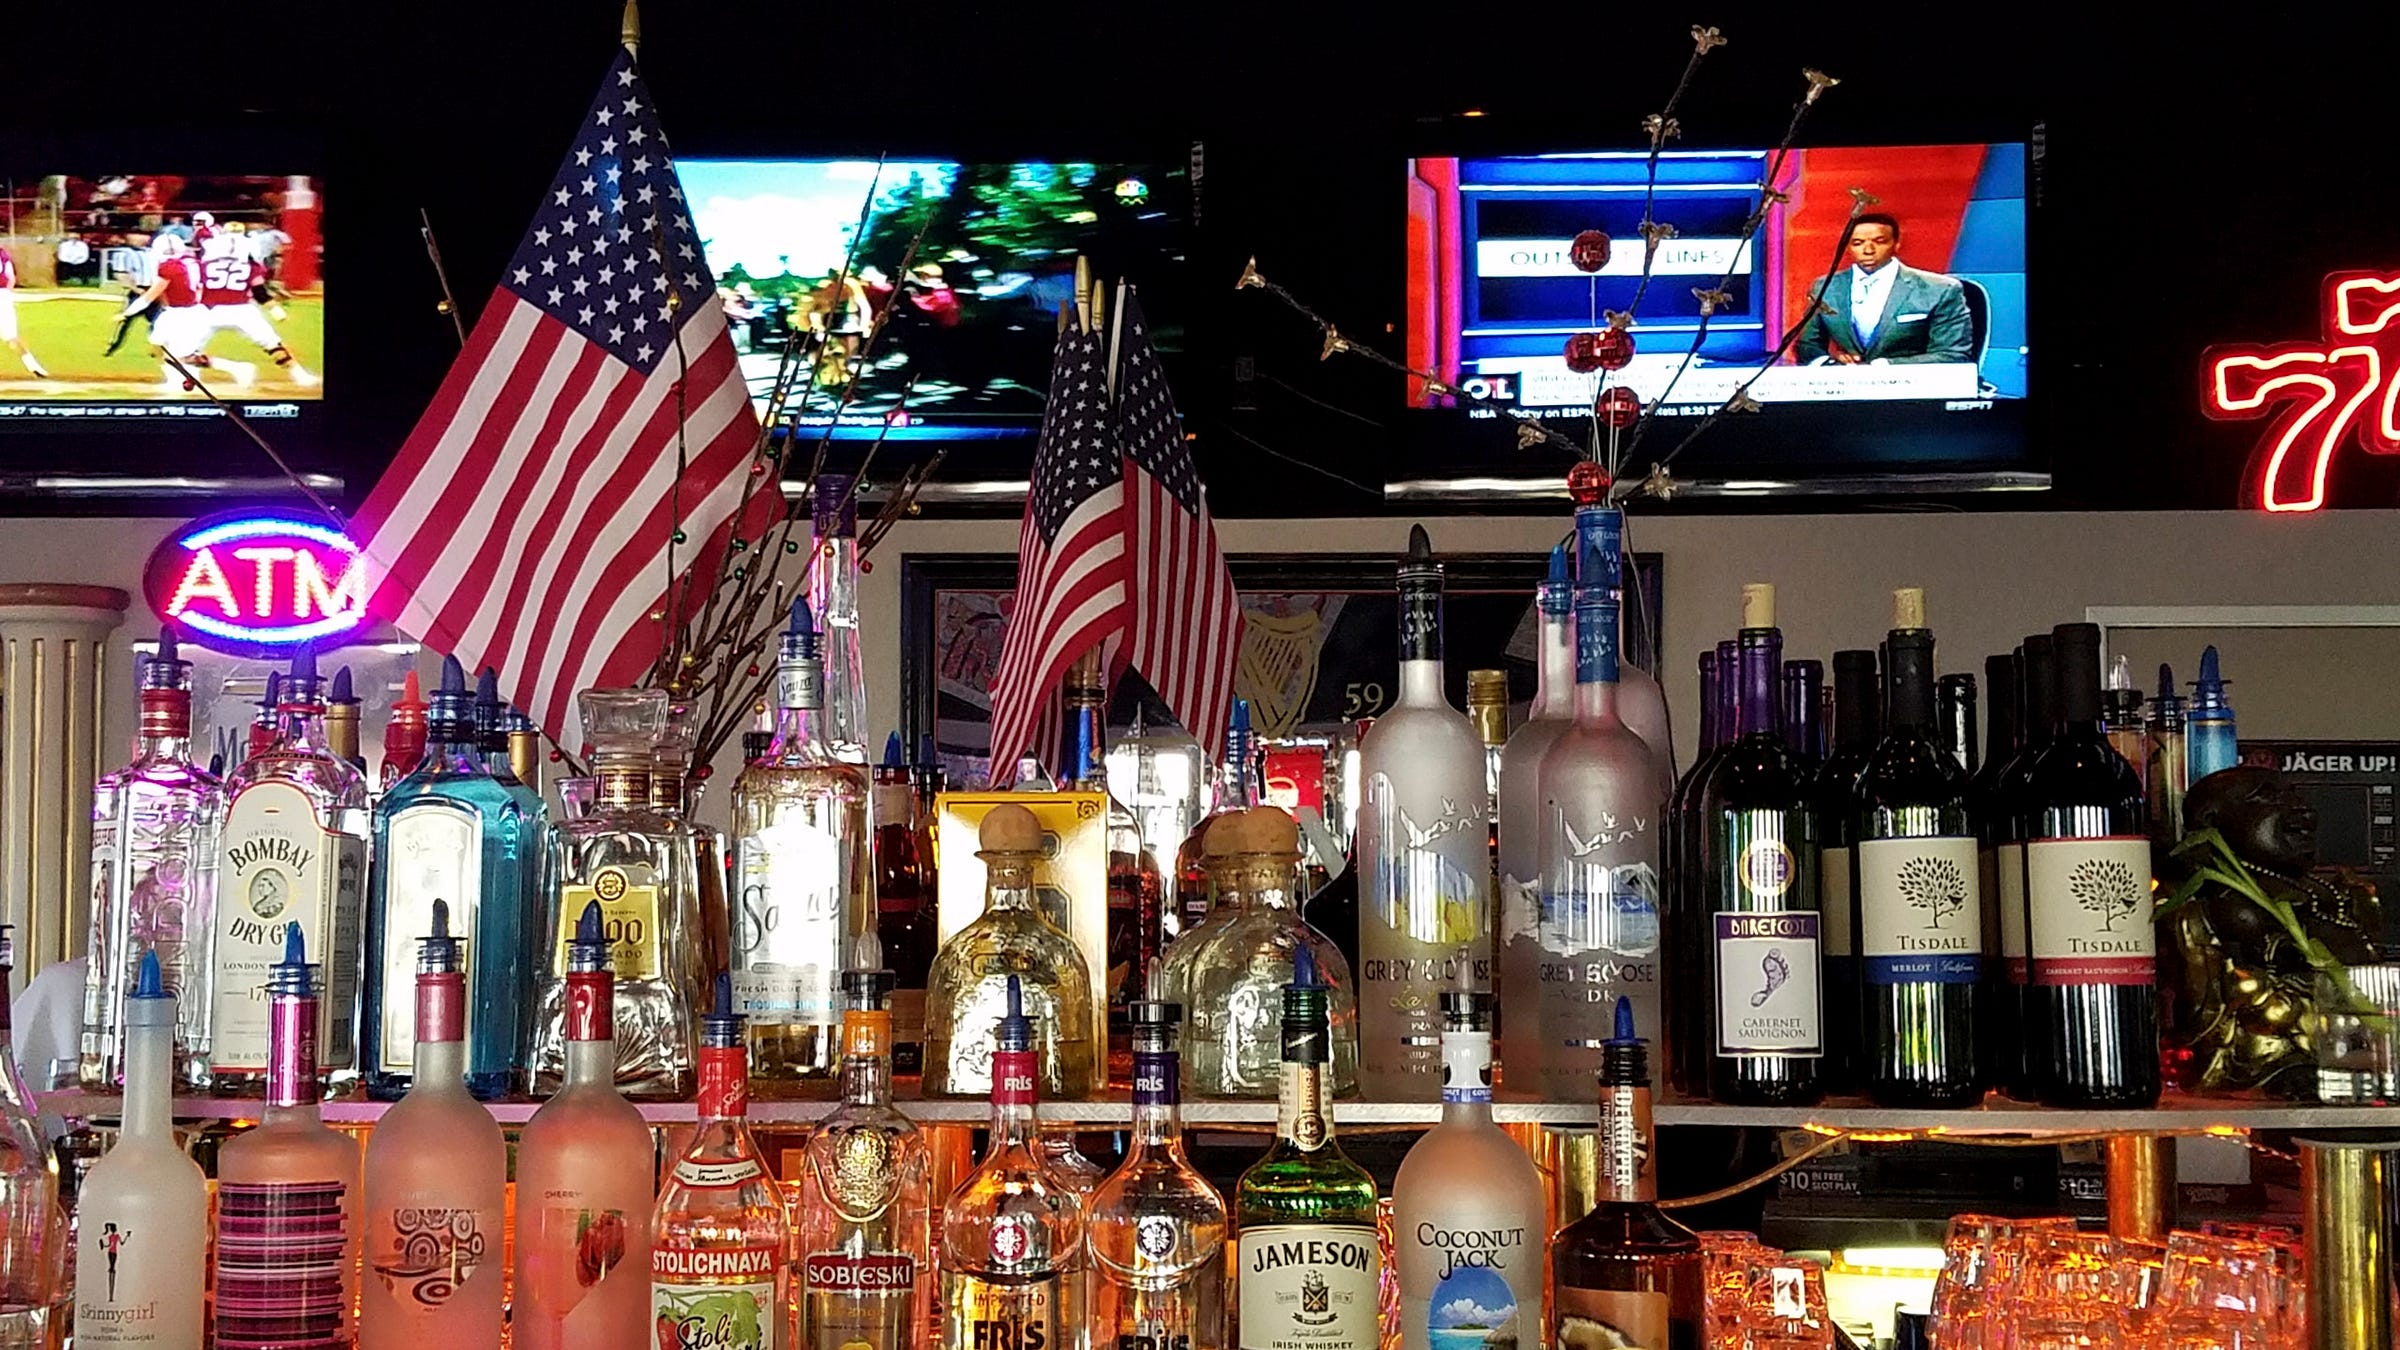 Photo of a bar. In the foreground are two stacked rows of bottles, including some corked bottles of wine and mostly liquor bottles with spouts for easy pouring. Behind  the bottles are a handful of US flags. Behind them, against a distant wall,  is a gaudy white architectural column with gold fluting and a marble capital. The column is simple stuck to the wall and is not supporting anything. Beside it is a neon sign, "ATM" in red letters sitting inside a blue neon oval. Another neon sign "77" sits to the right. At the top of the wall are three large, flatscreen televisions showing a football game, a bicycle race, and a sports reporter talking to camera in a studio setting.